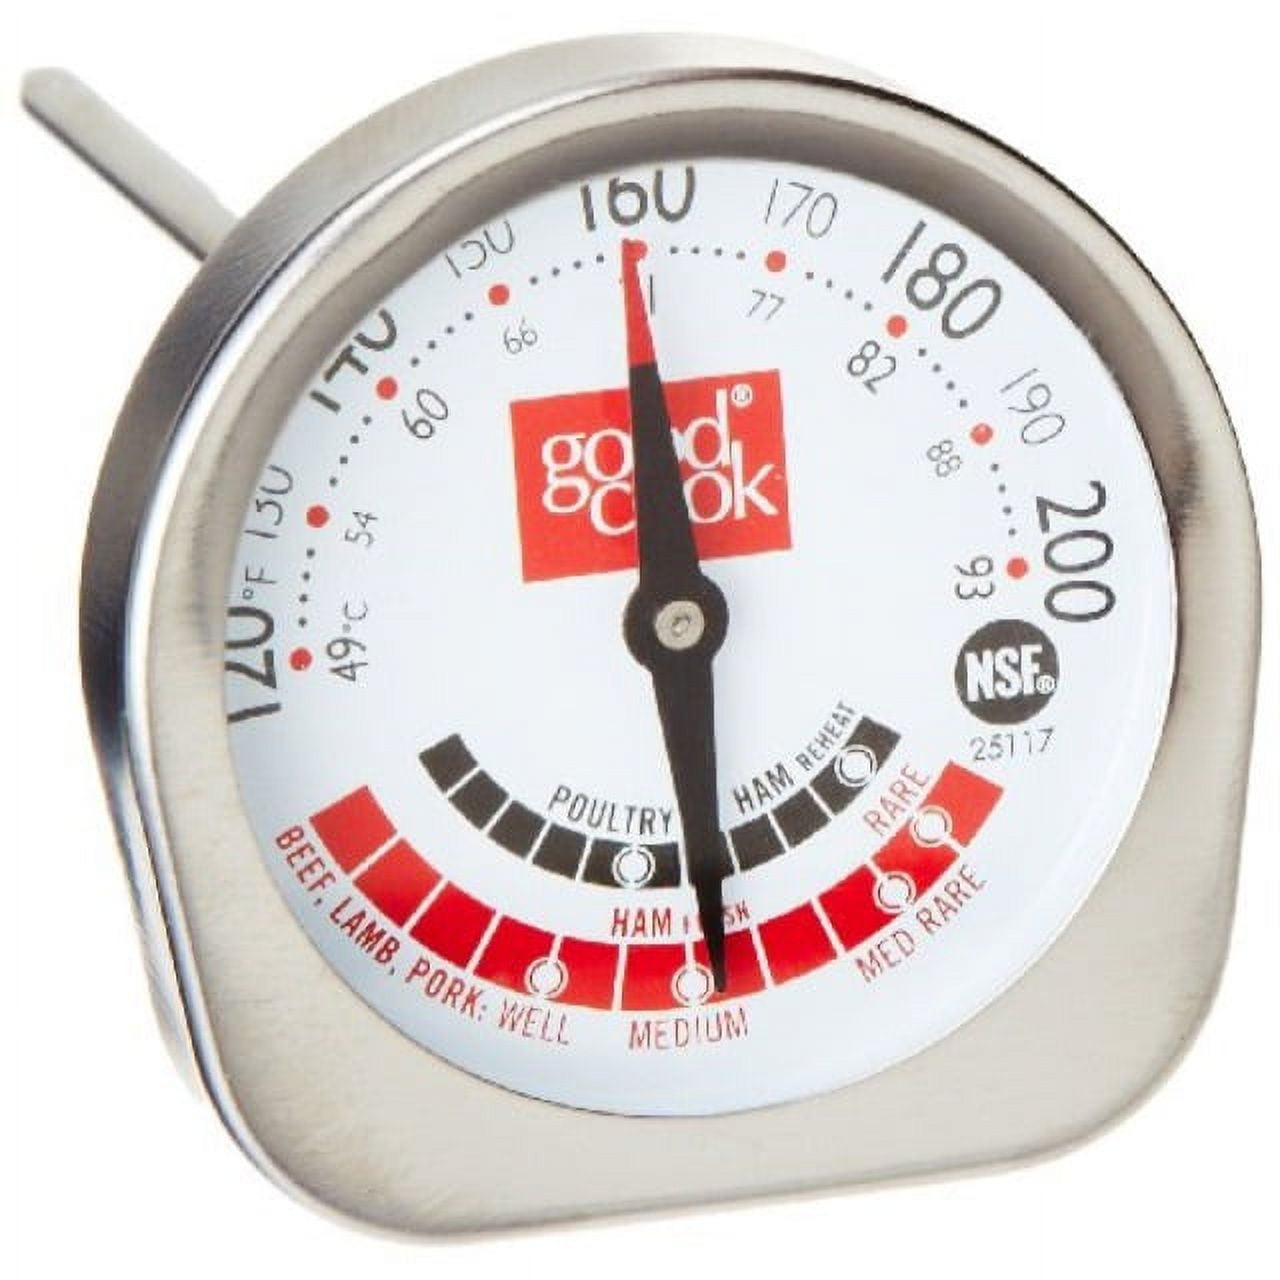 Good Cook Meat Thermometer